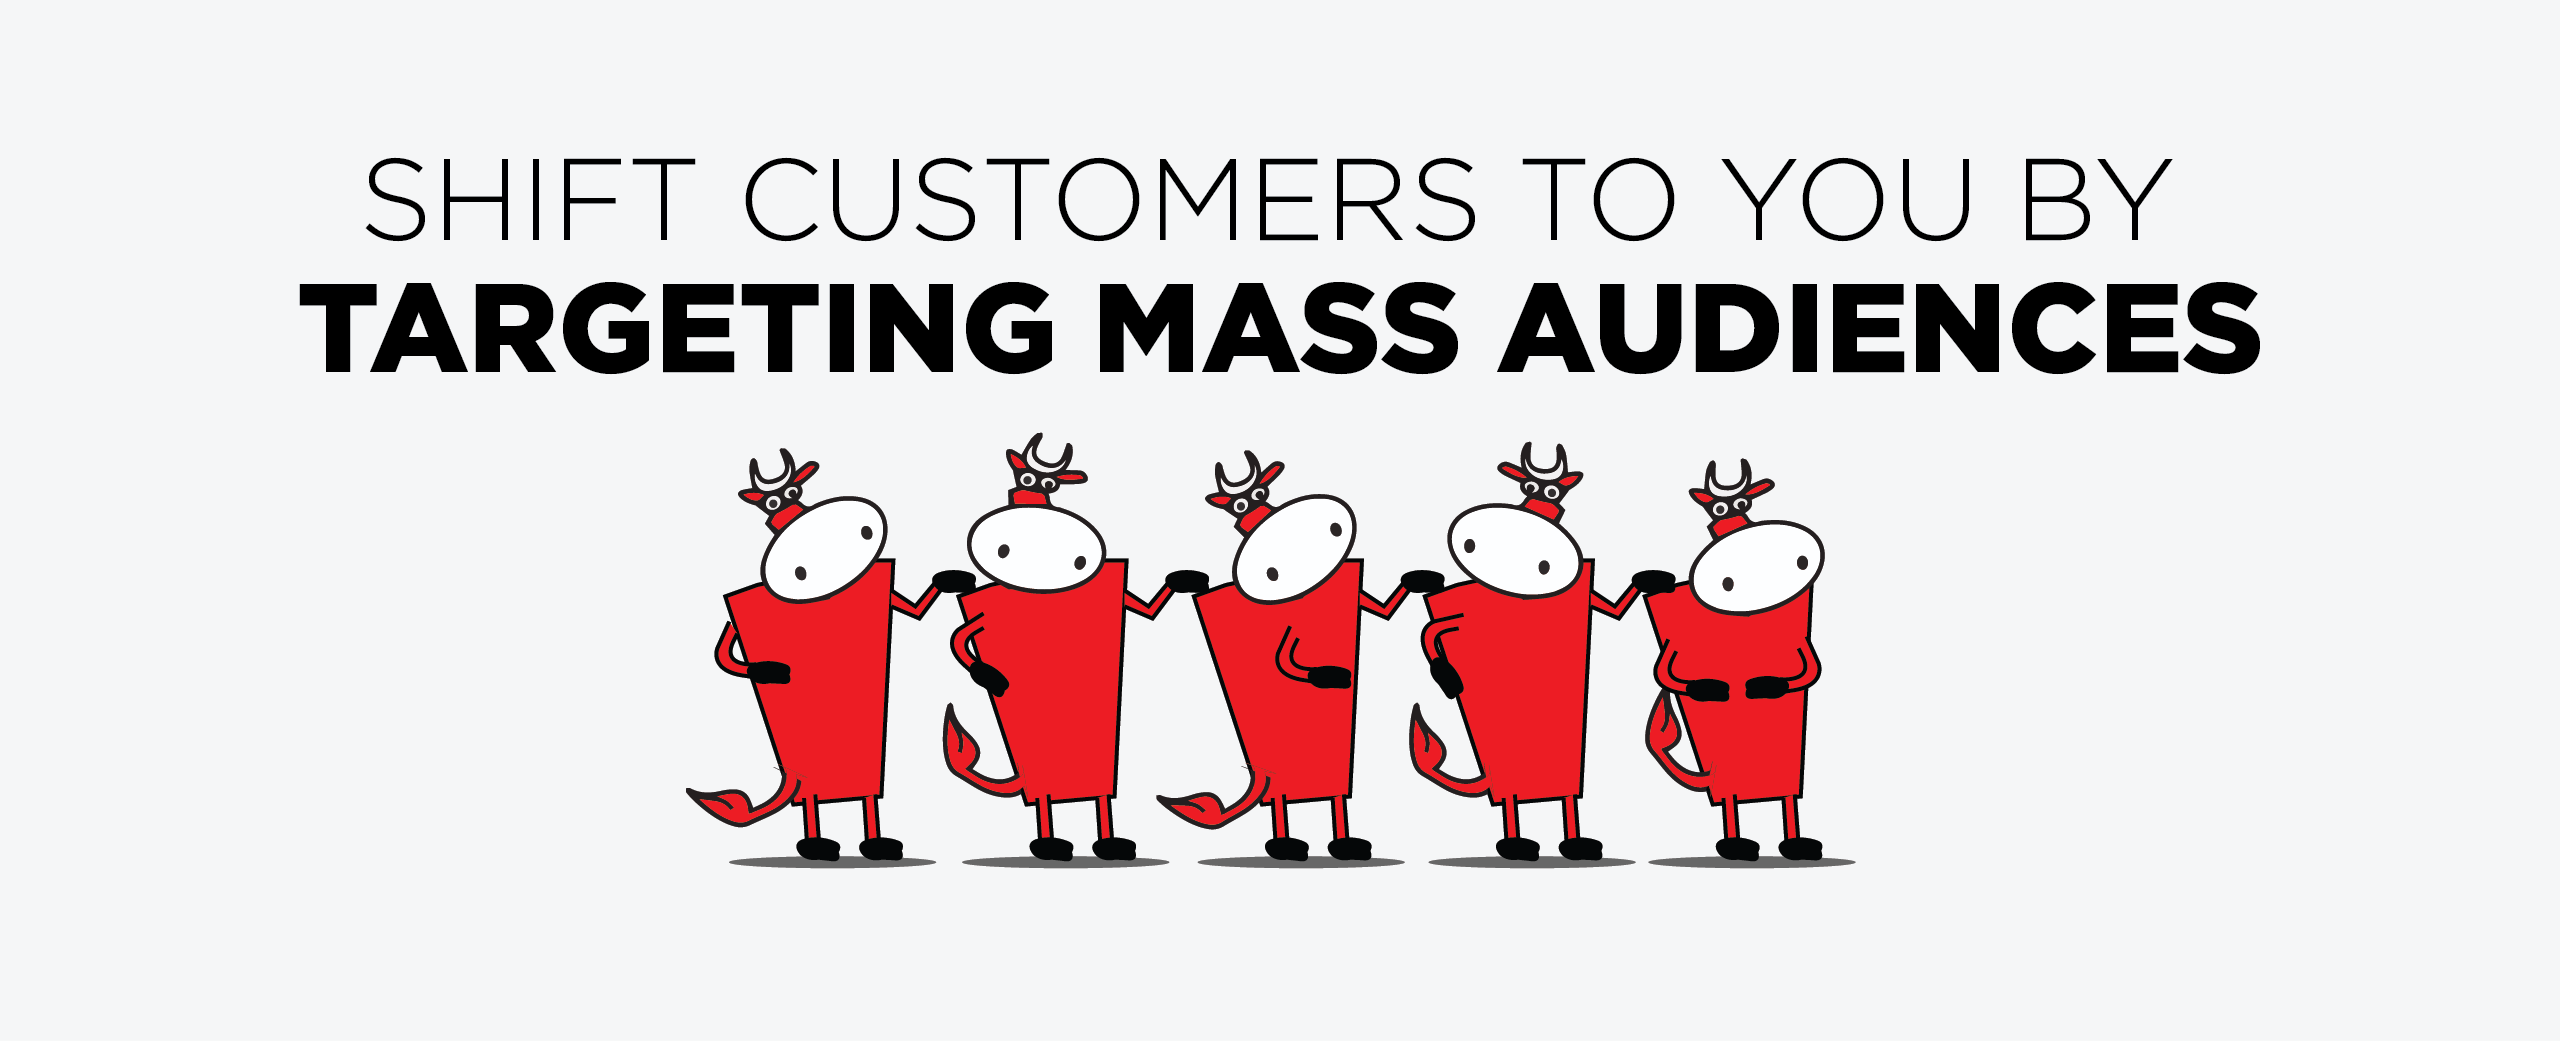 SHIFT CUSTOMERS TO YOU BY TARGETING MASS AUDIENCES